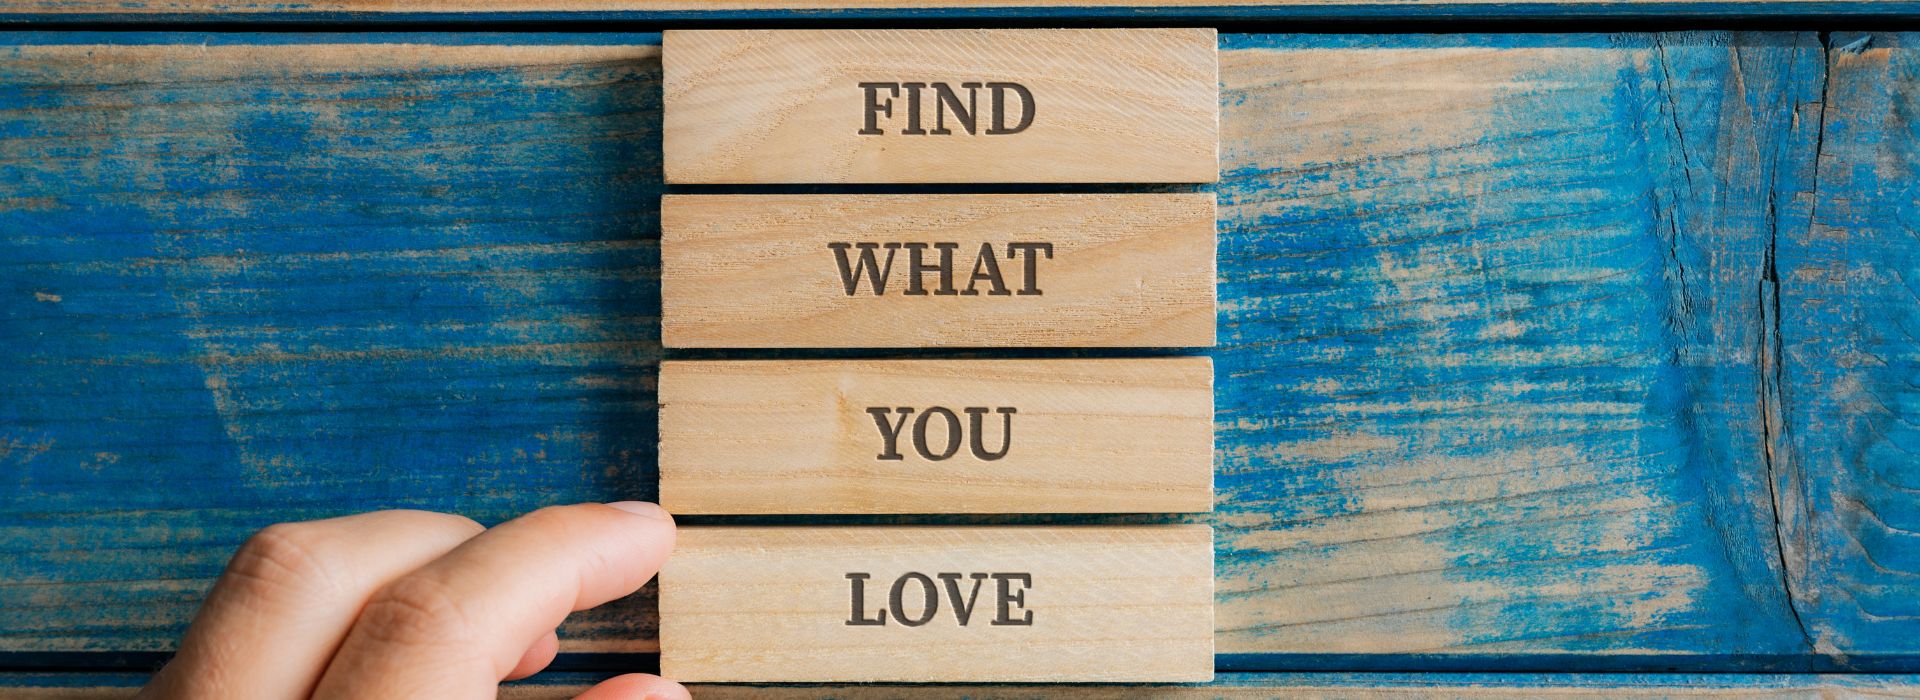 Find what you love | How to live more joyfully | Shine Body & Bath Chakra Soap | Blog